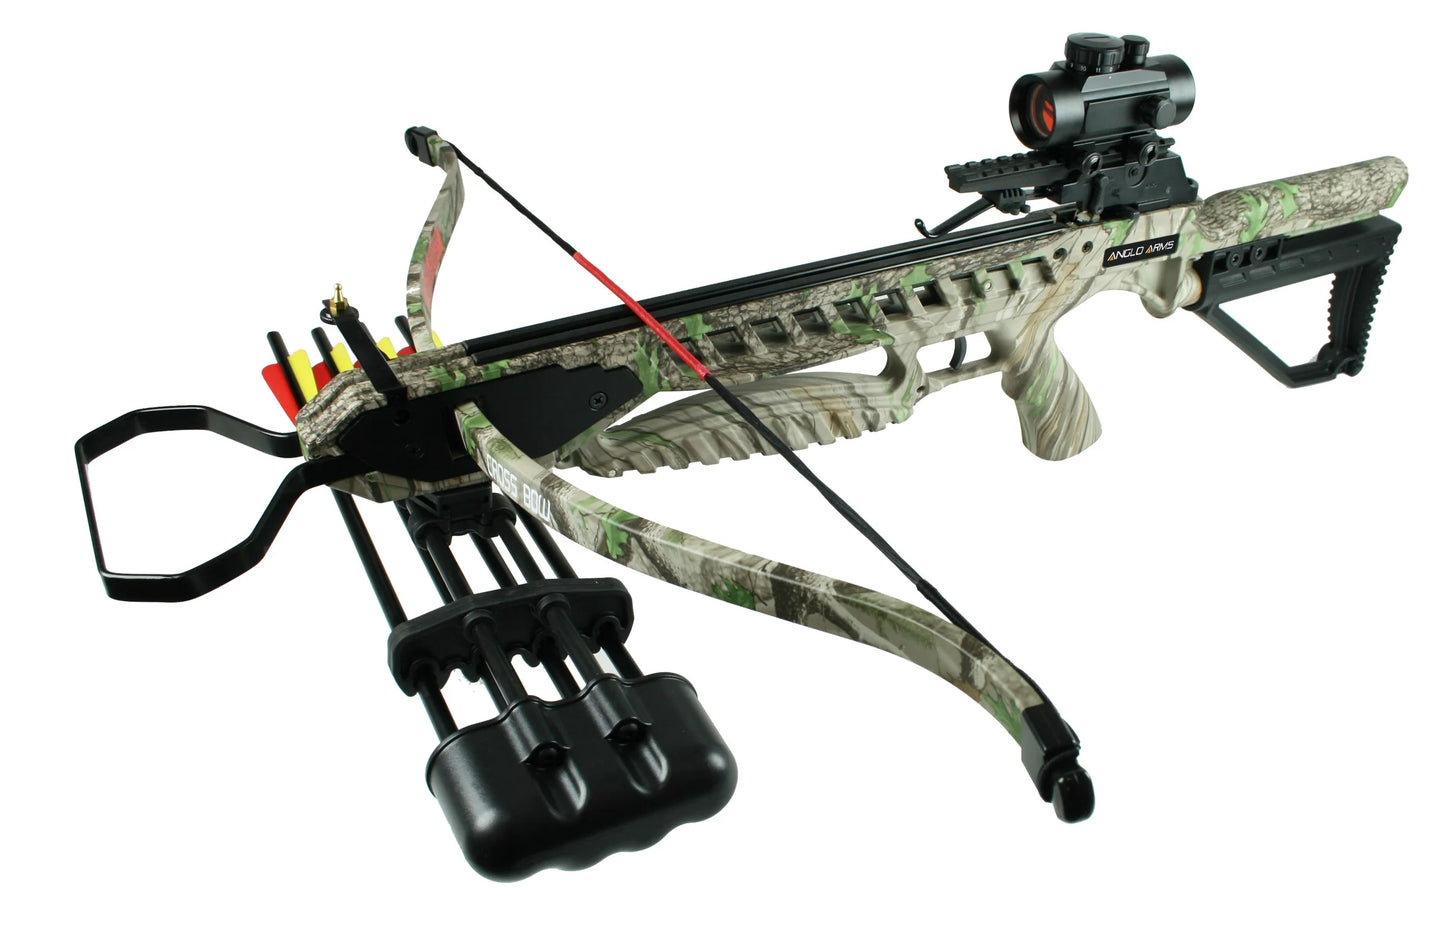 Anglo Arms Panther Camo 175lb Crossbow